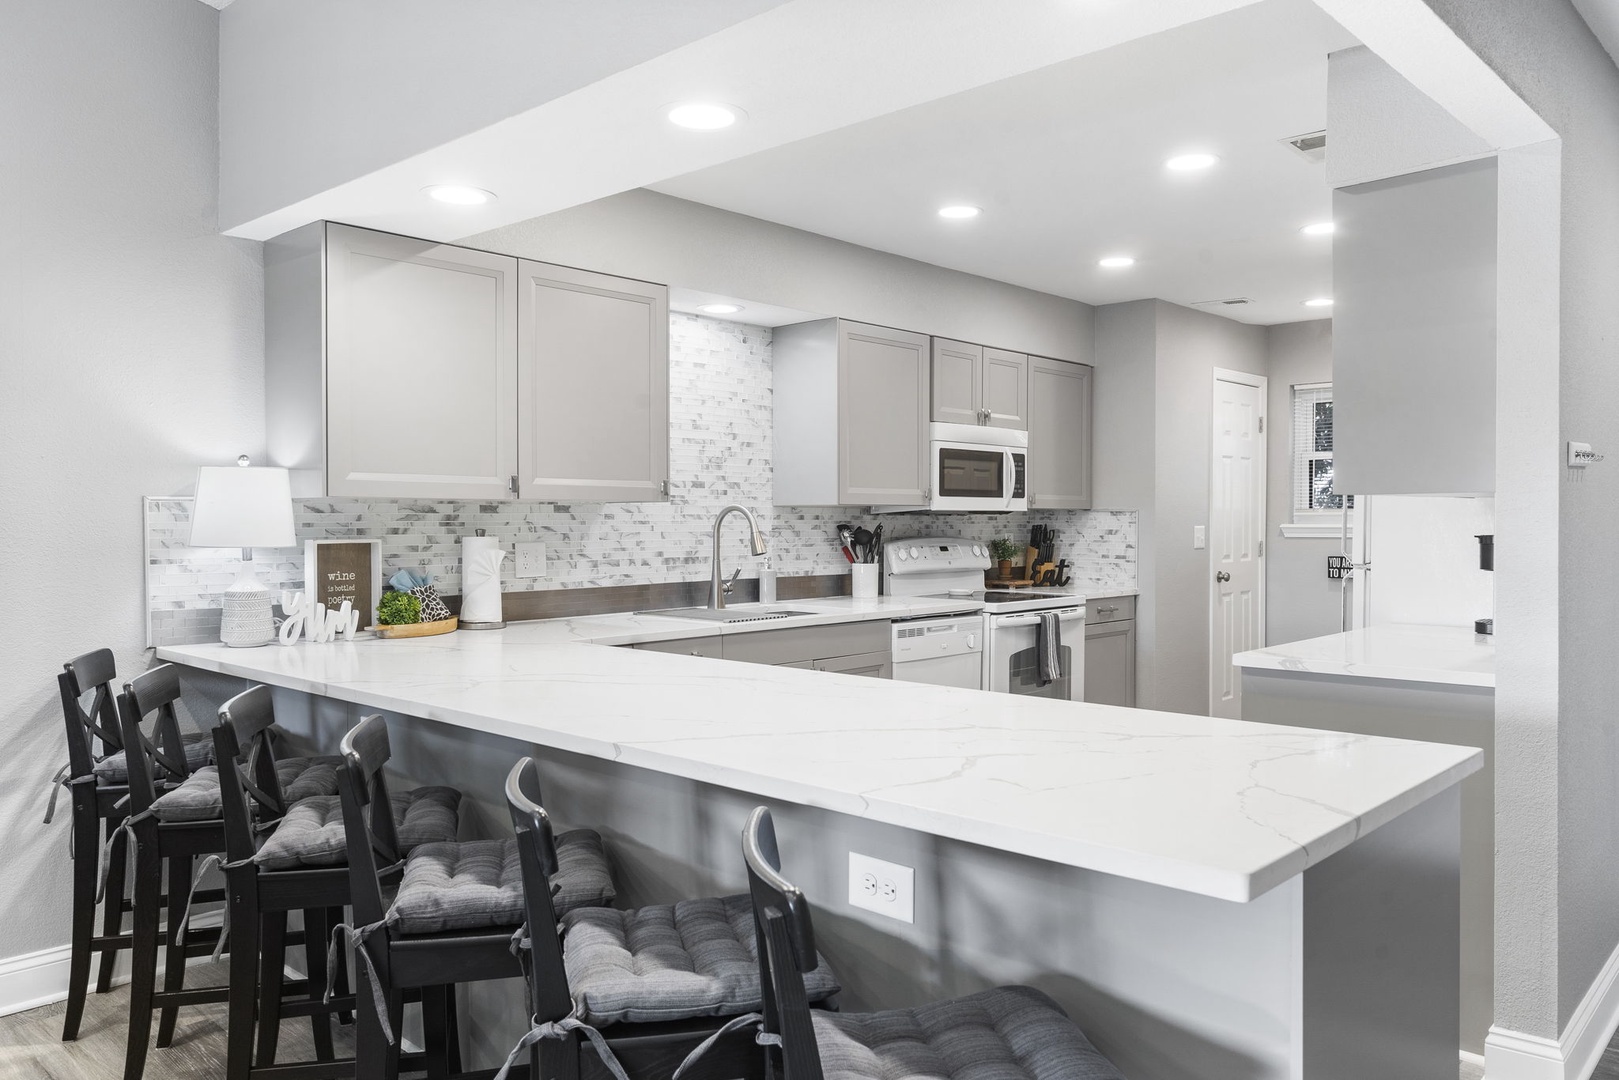 Sip morning coffee or grab a bite at the kitchen counter, with room for 6